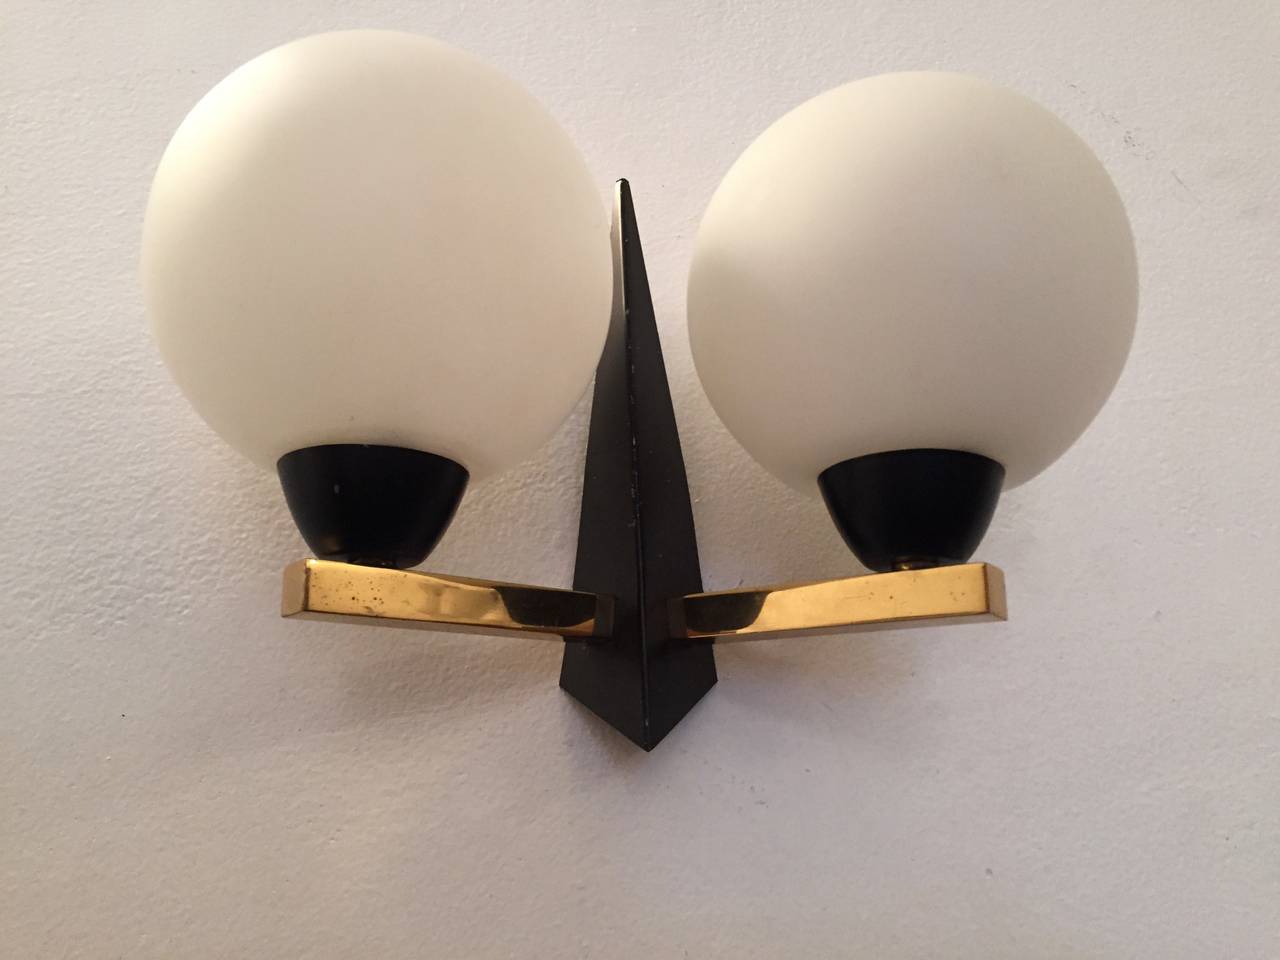 A great pair of original 1950s French Mid-Century sconces. They are composed of a black enamel and polished brass frame with two white glass globes. Rewired.